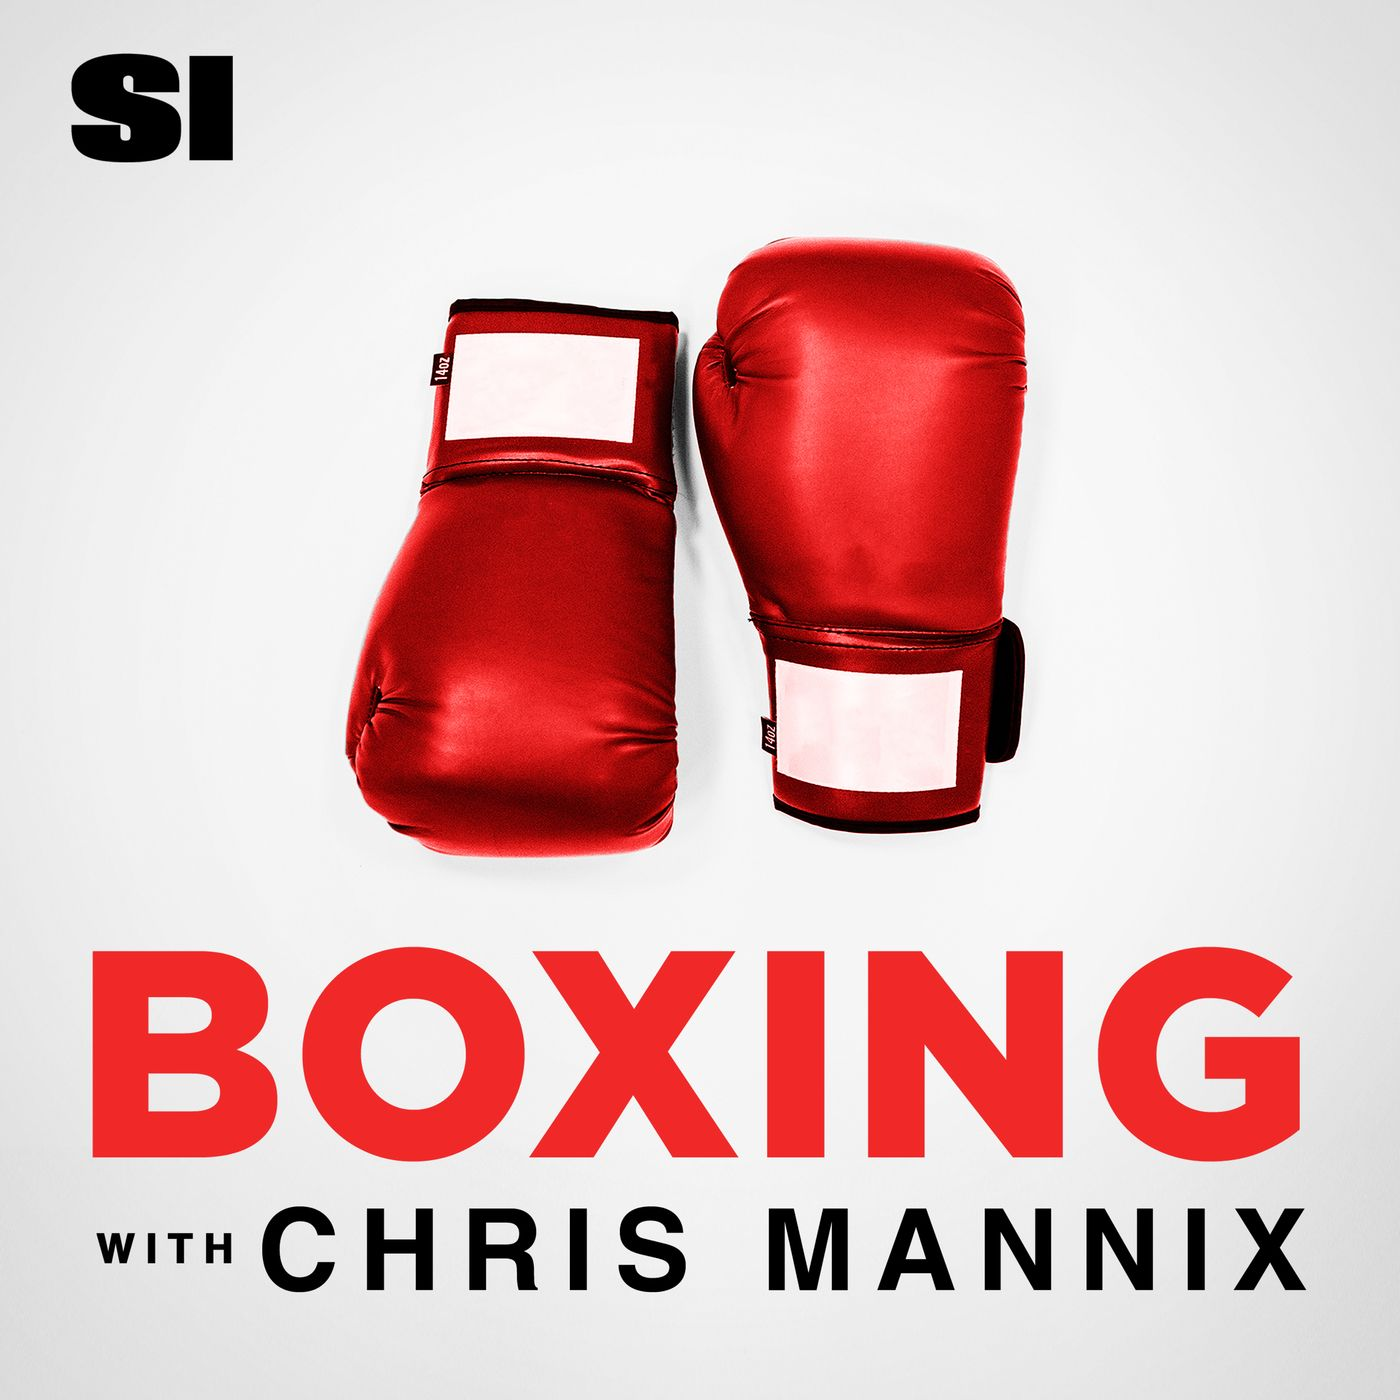 A highlight from Boxing with Chris Mannix - Will Anyone Watch Terence Crawford?